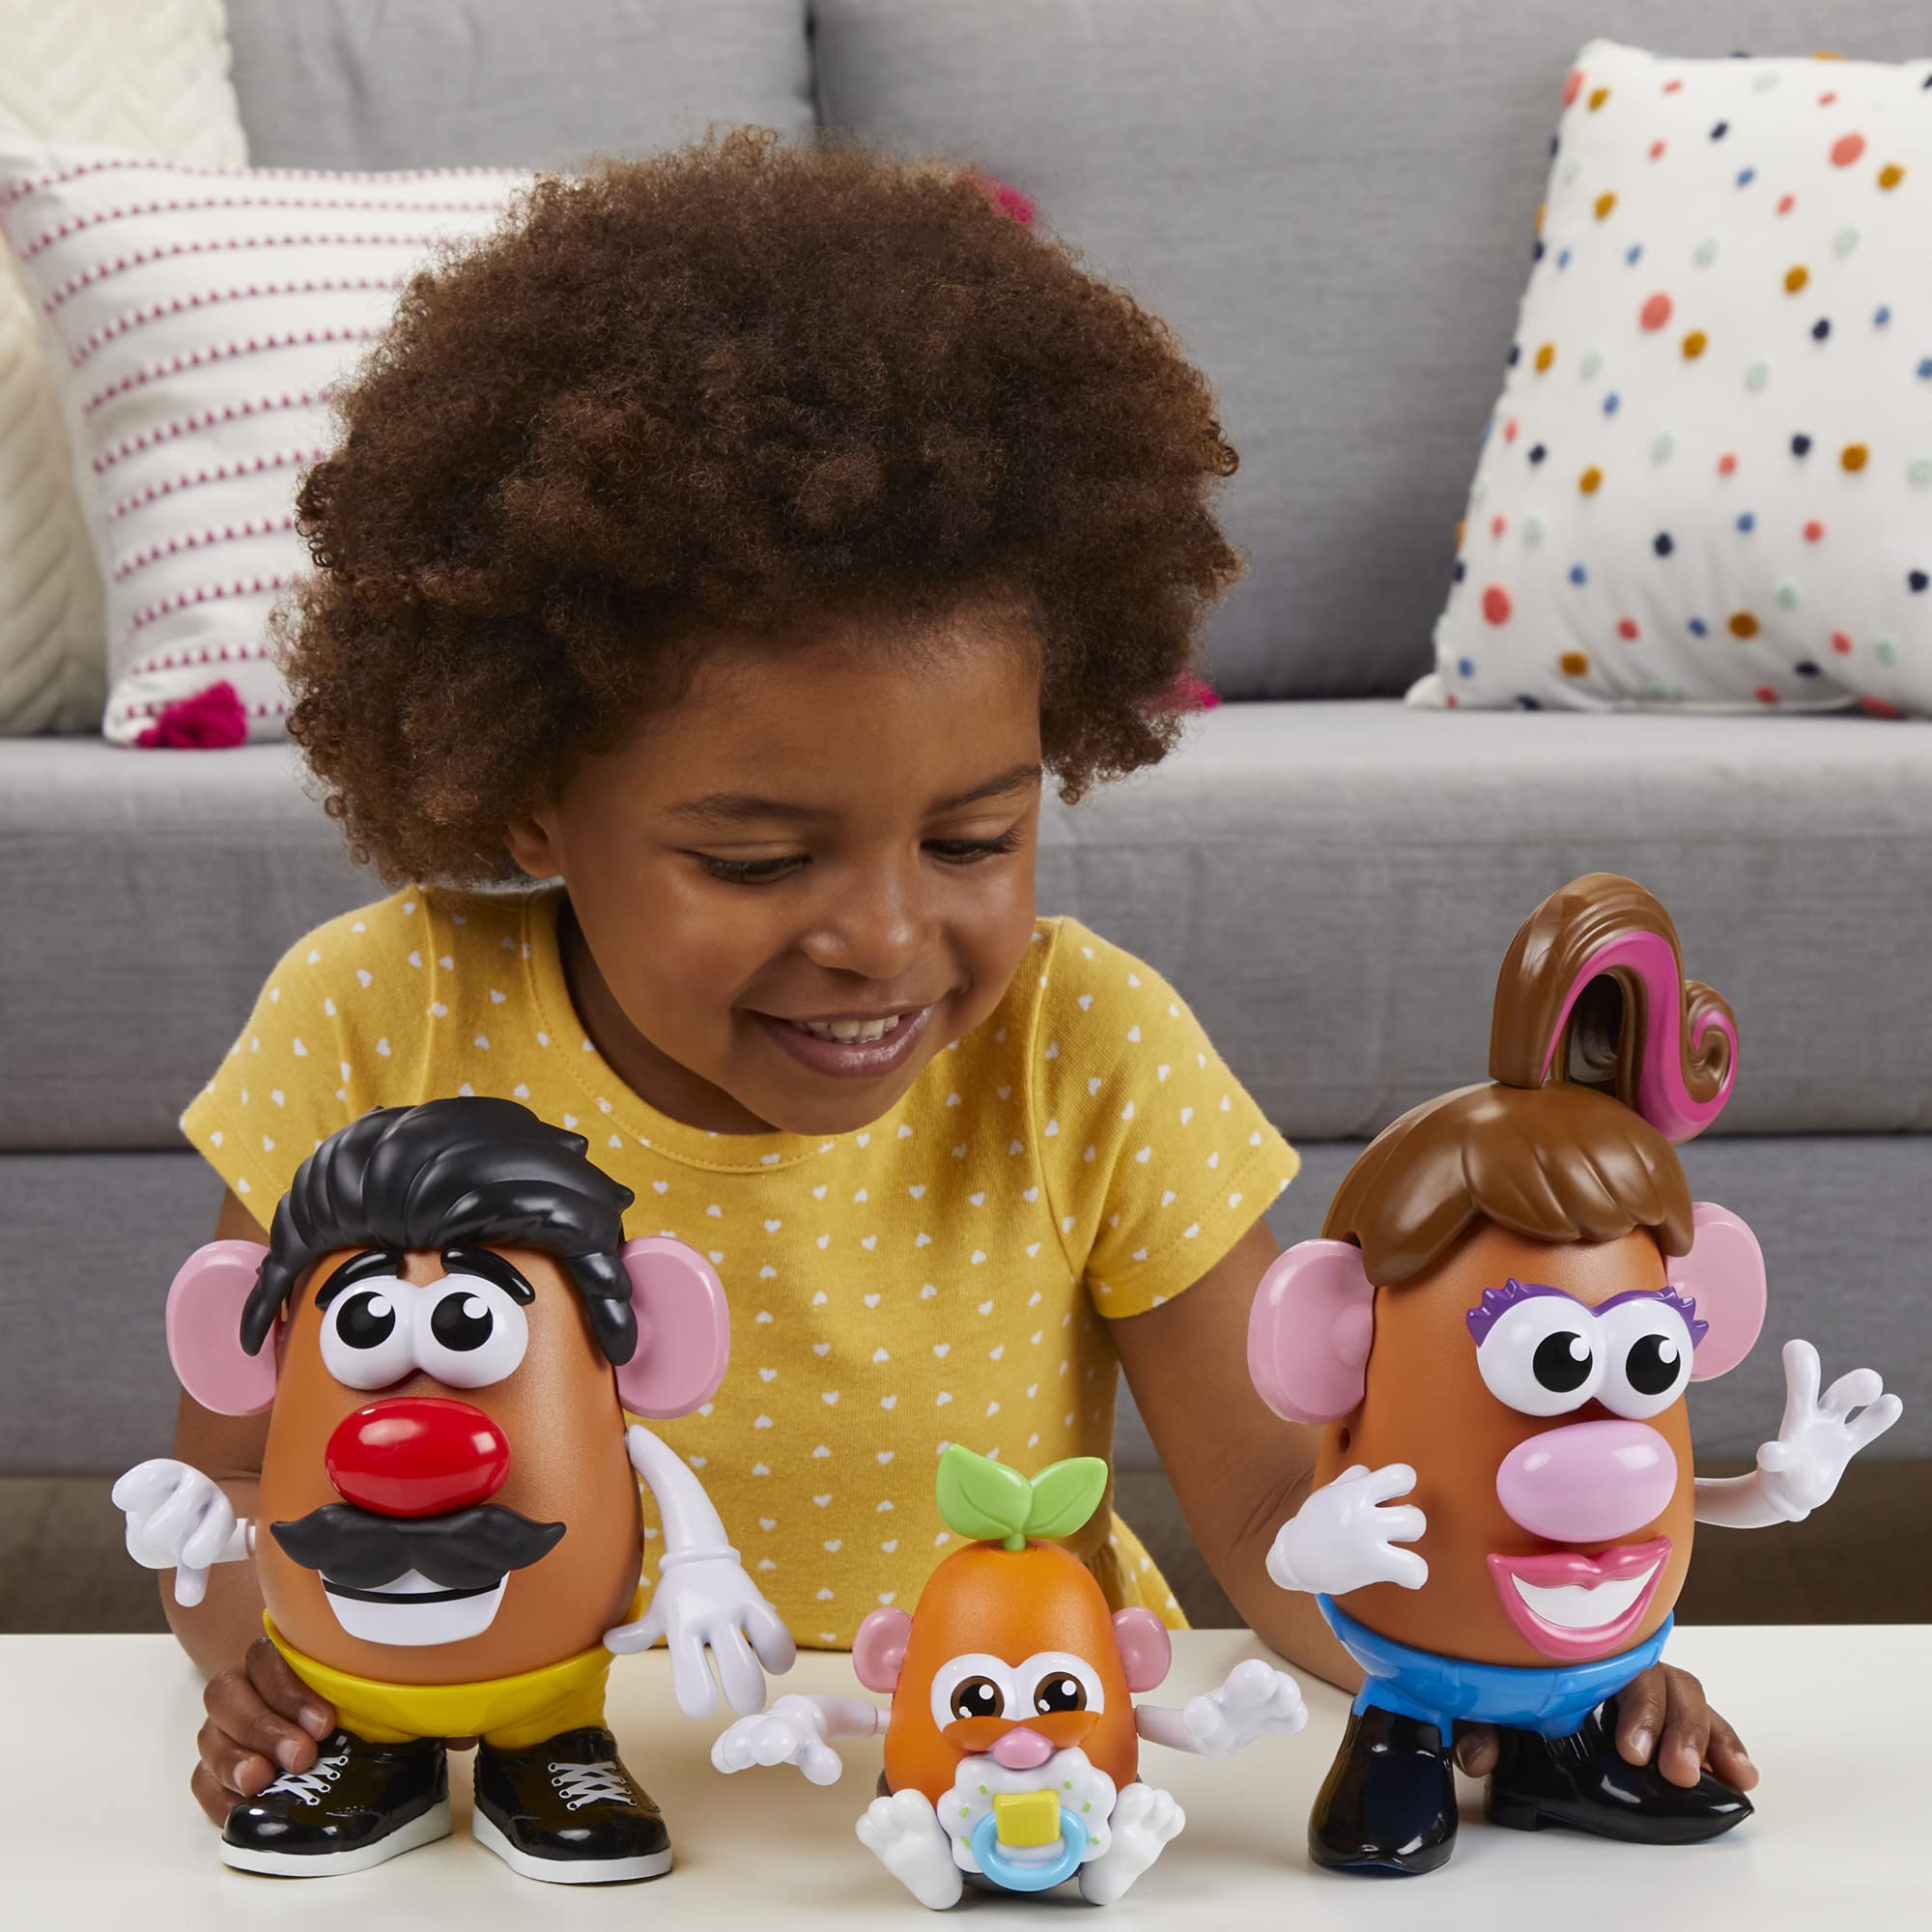 Potato Head Create Your Potato Head Family Toy For Kids Ages 2 and Up, Includes 45 Pieces to Create and Customize Potato Families